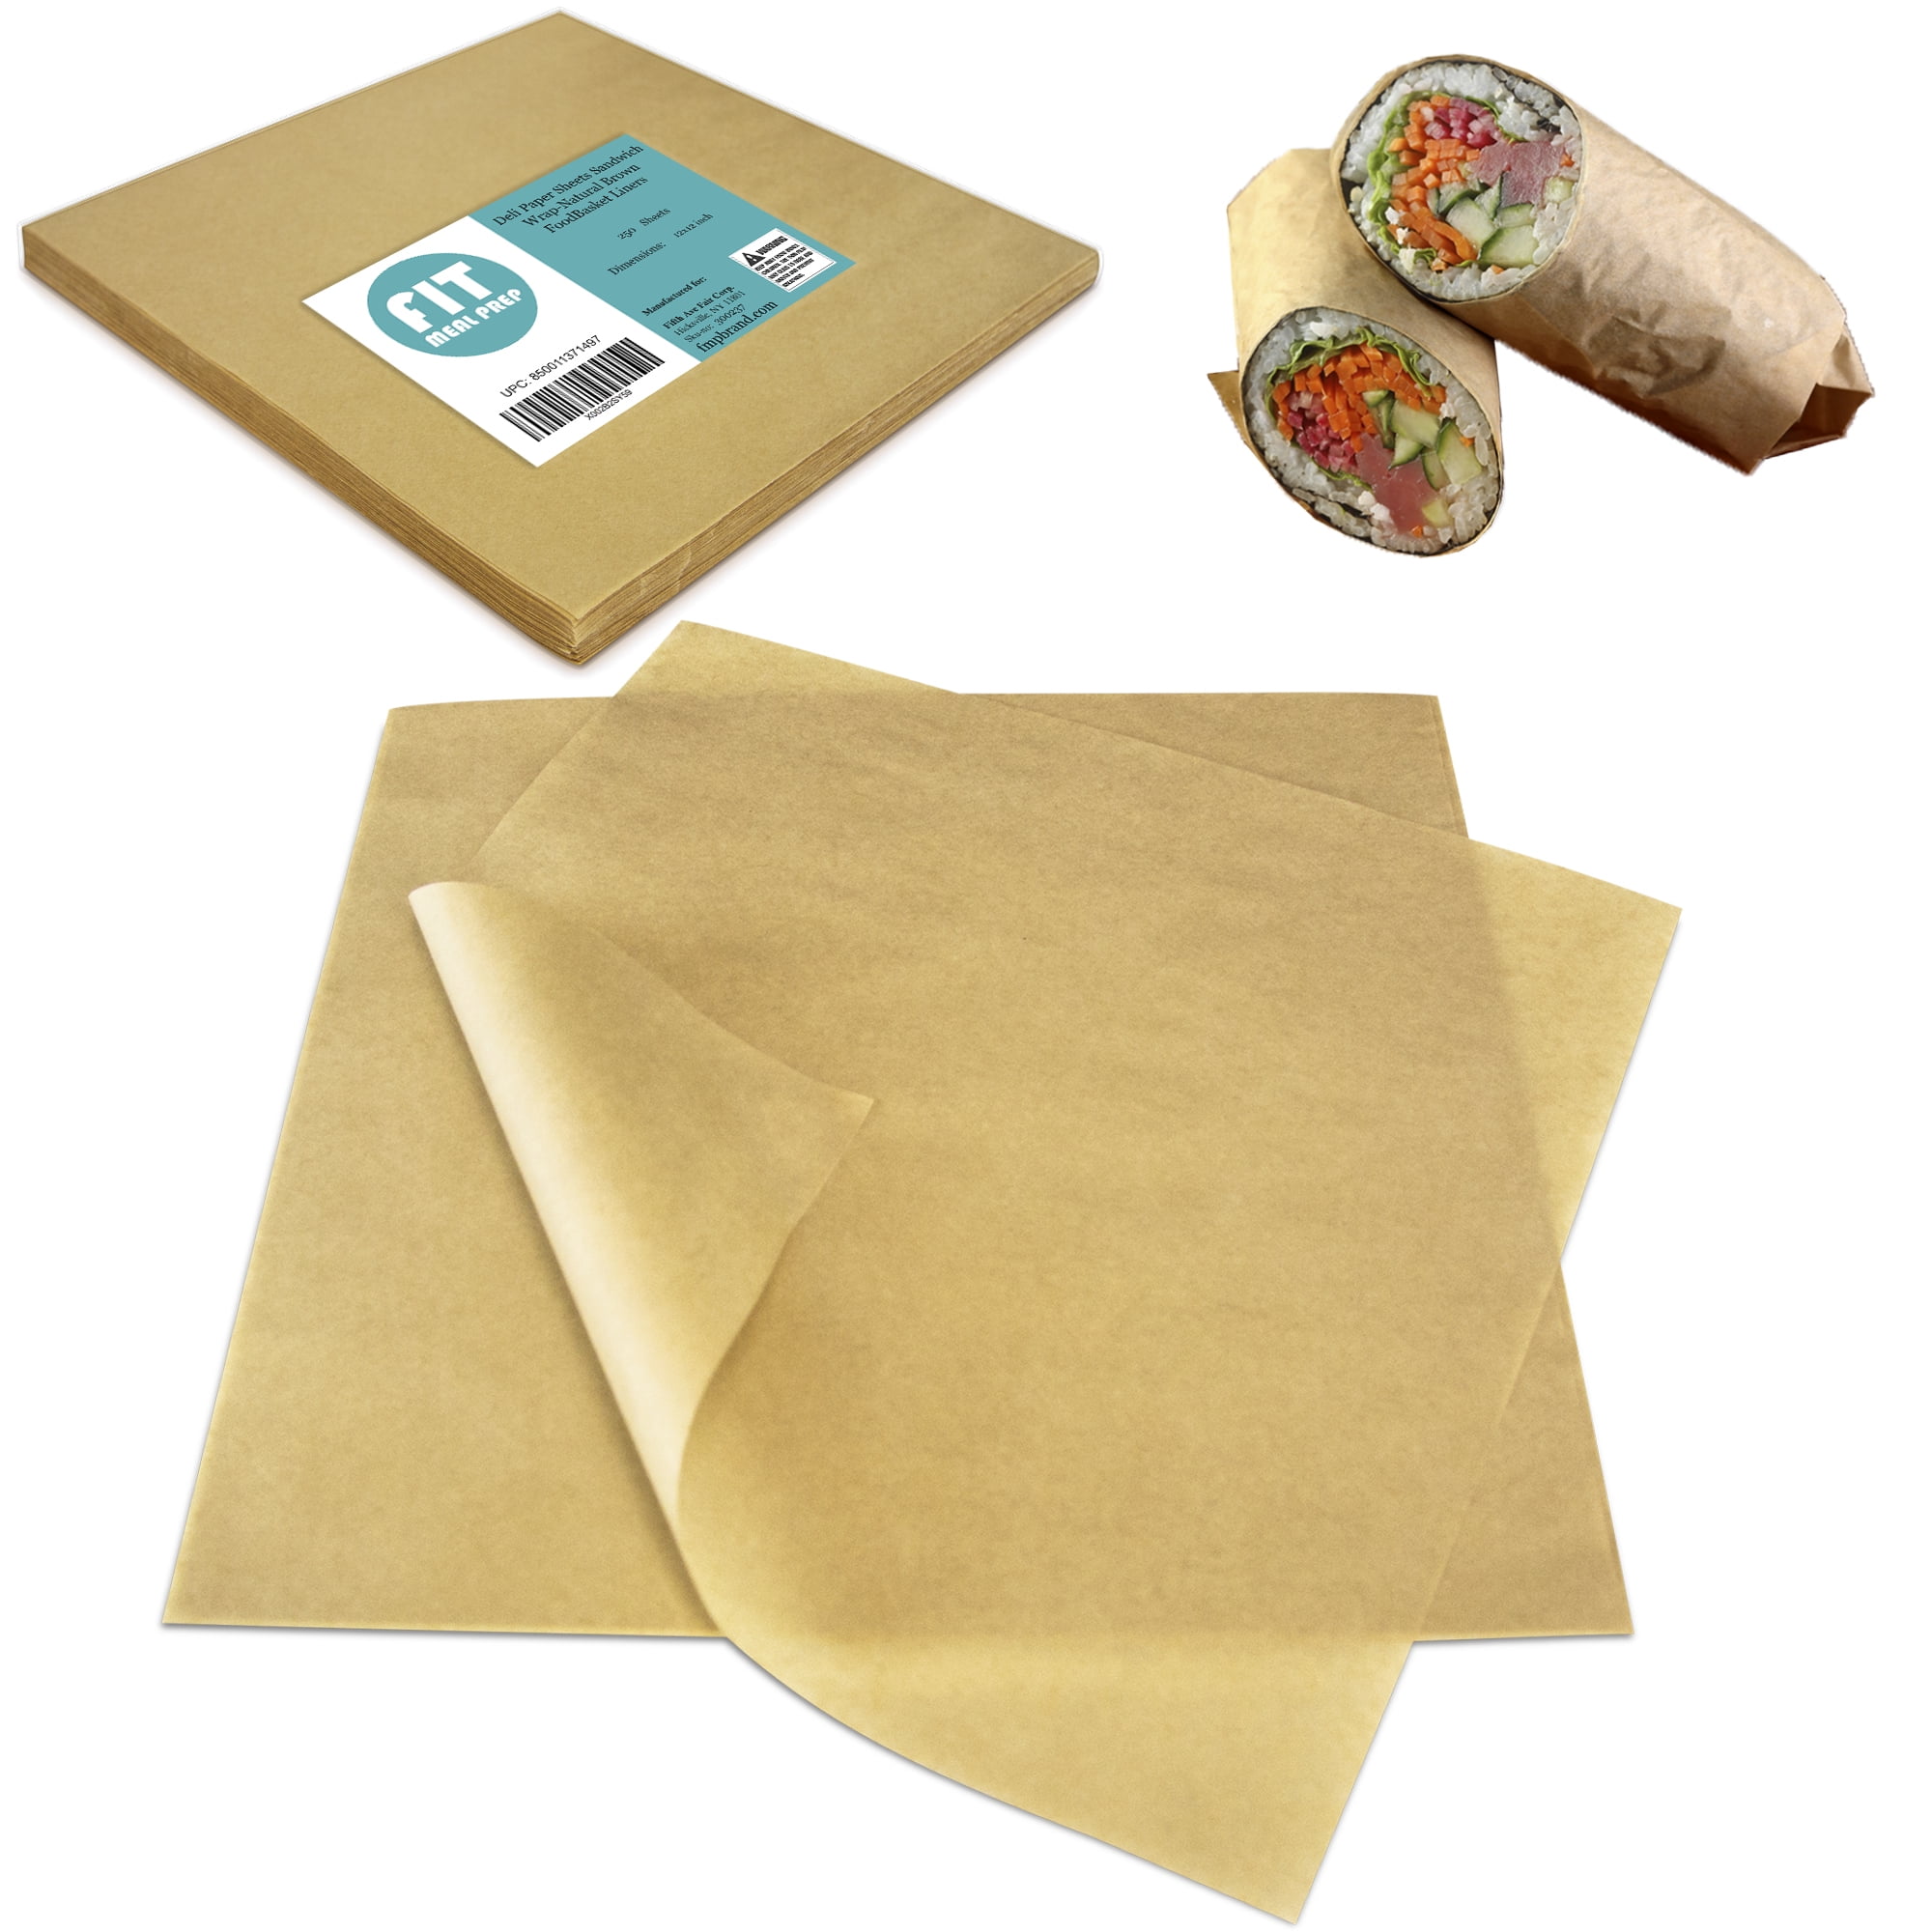 [250 Sheets] 12x12 Inch Kraft Deli Paper Sheets Sandwich Wrap - Natural  Brown Food Basket Liners, Grease Resistant Wrapper for Pastries, Cookies